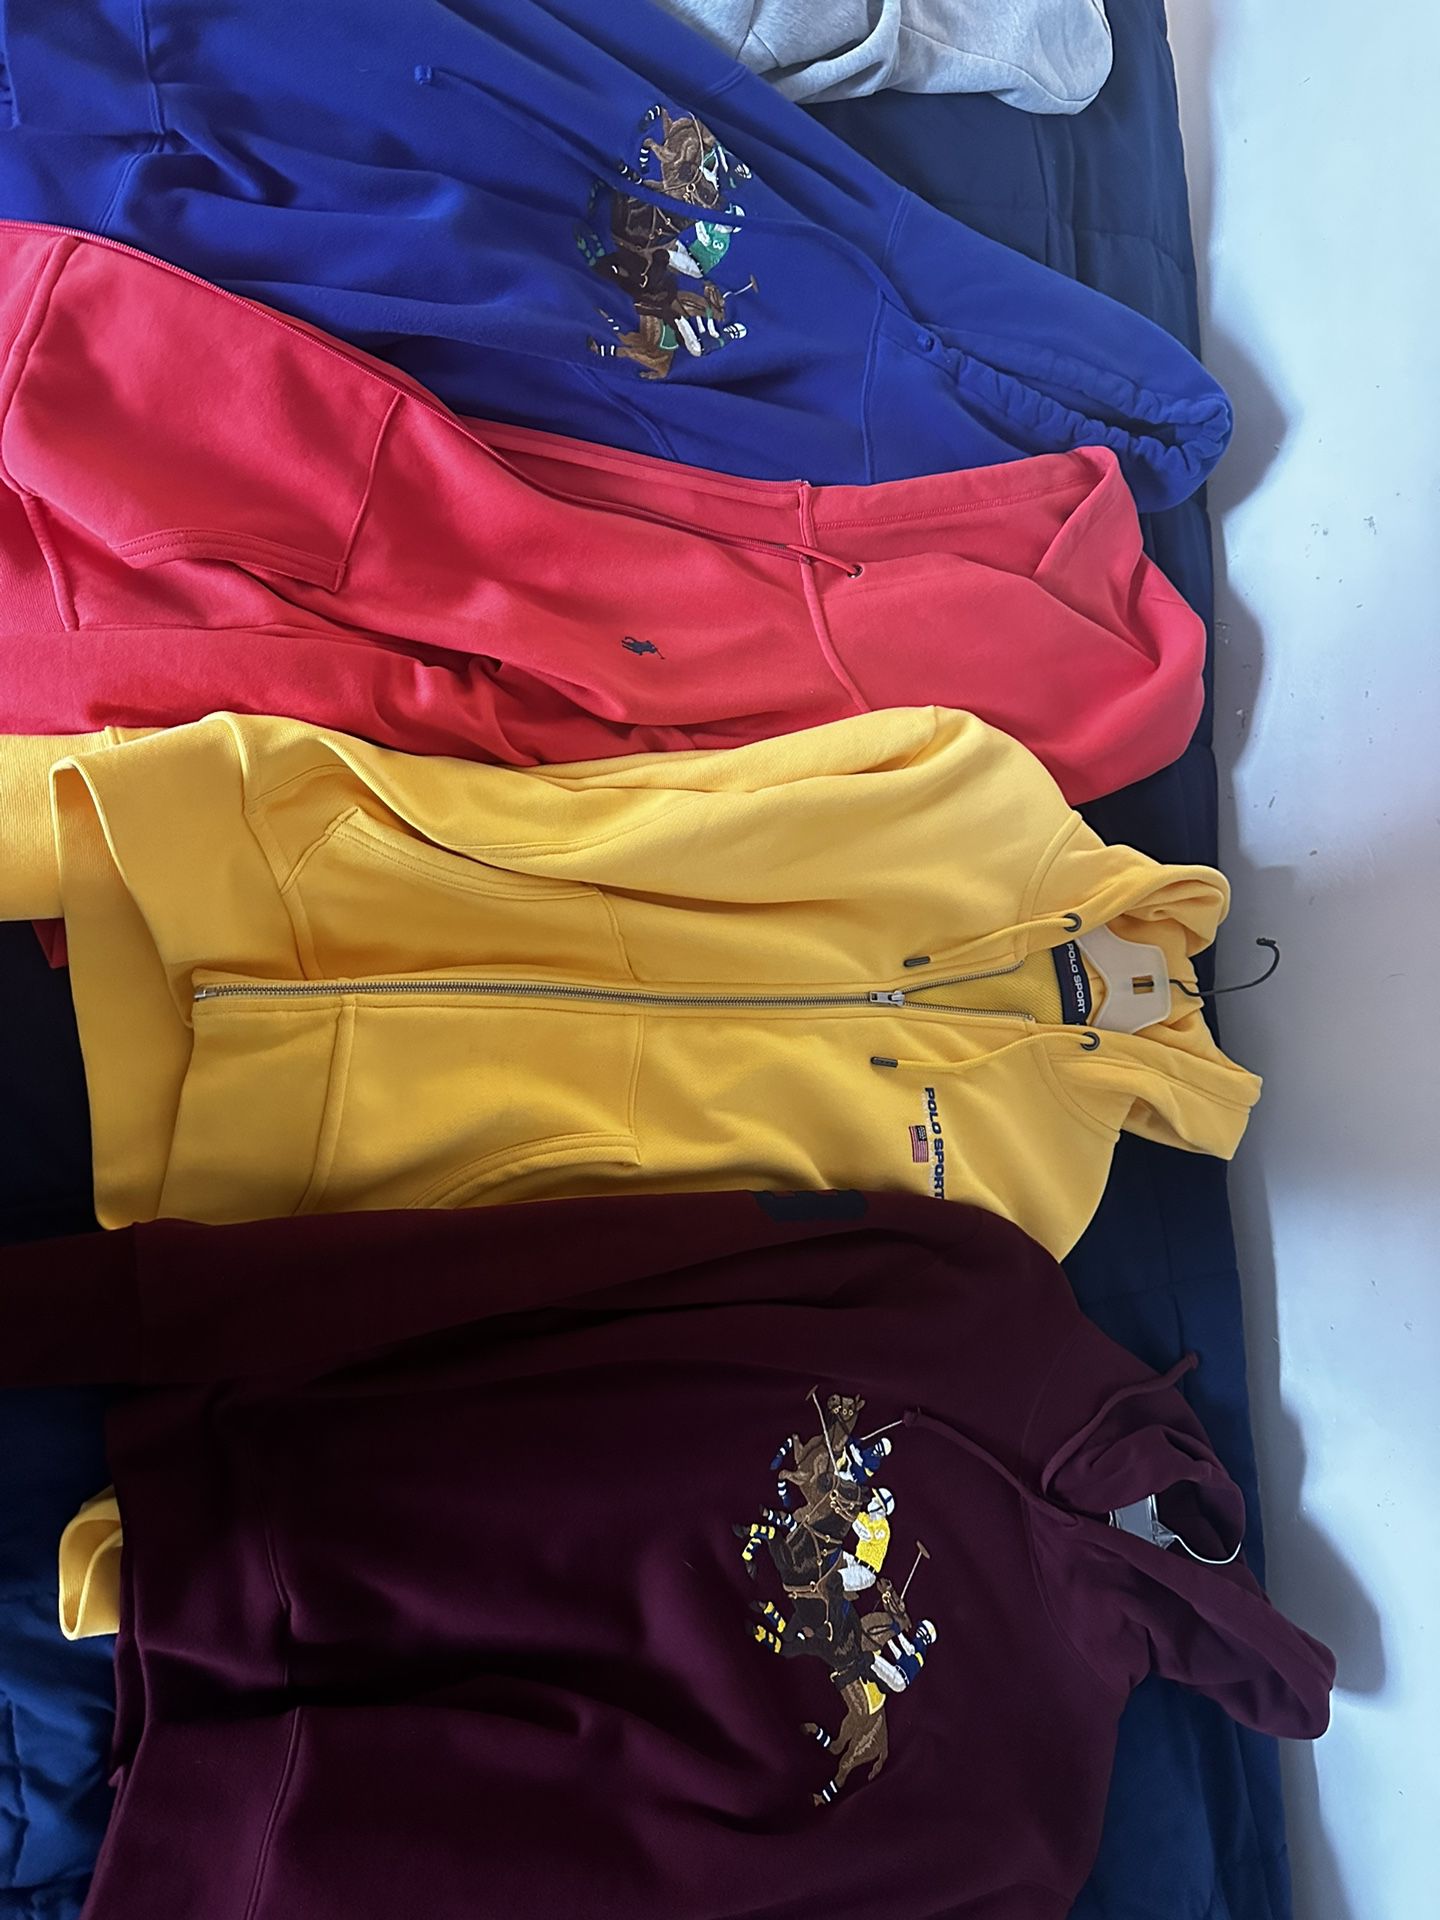 Polo Double Knitted Tracksuits, Hoodies, And pants (All medium) for Sale in  Boca Raton, FL - OfferUp